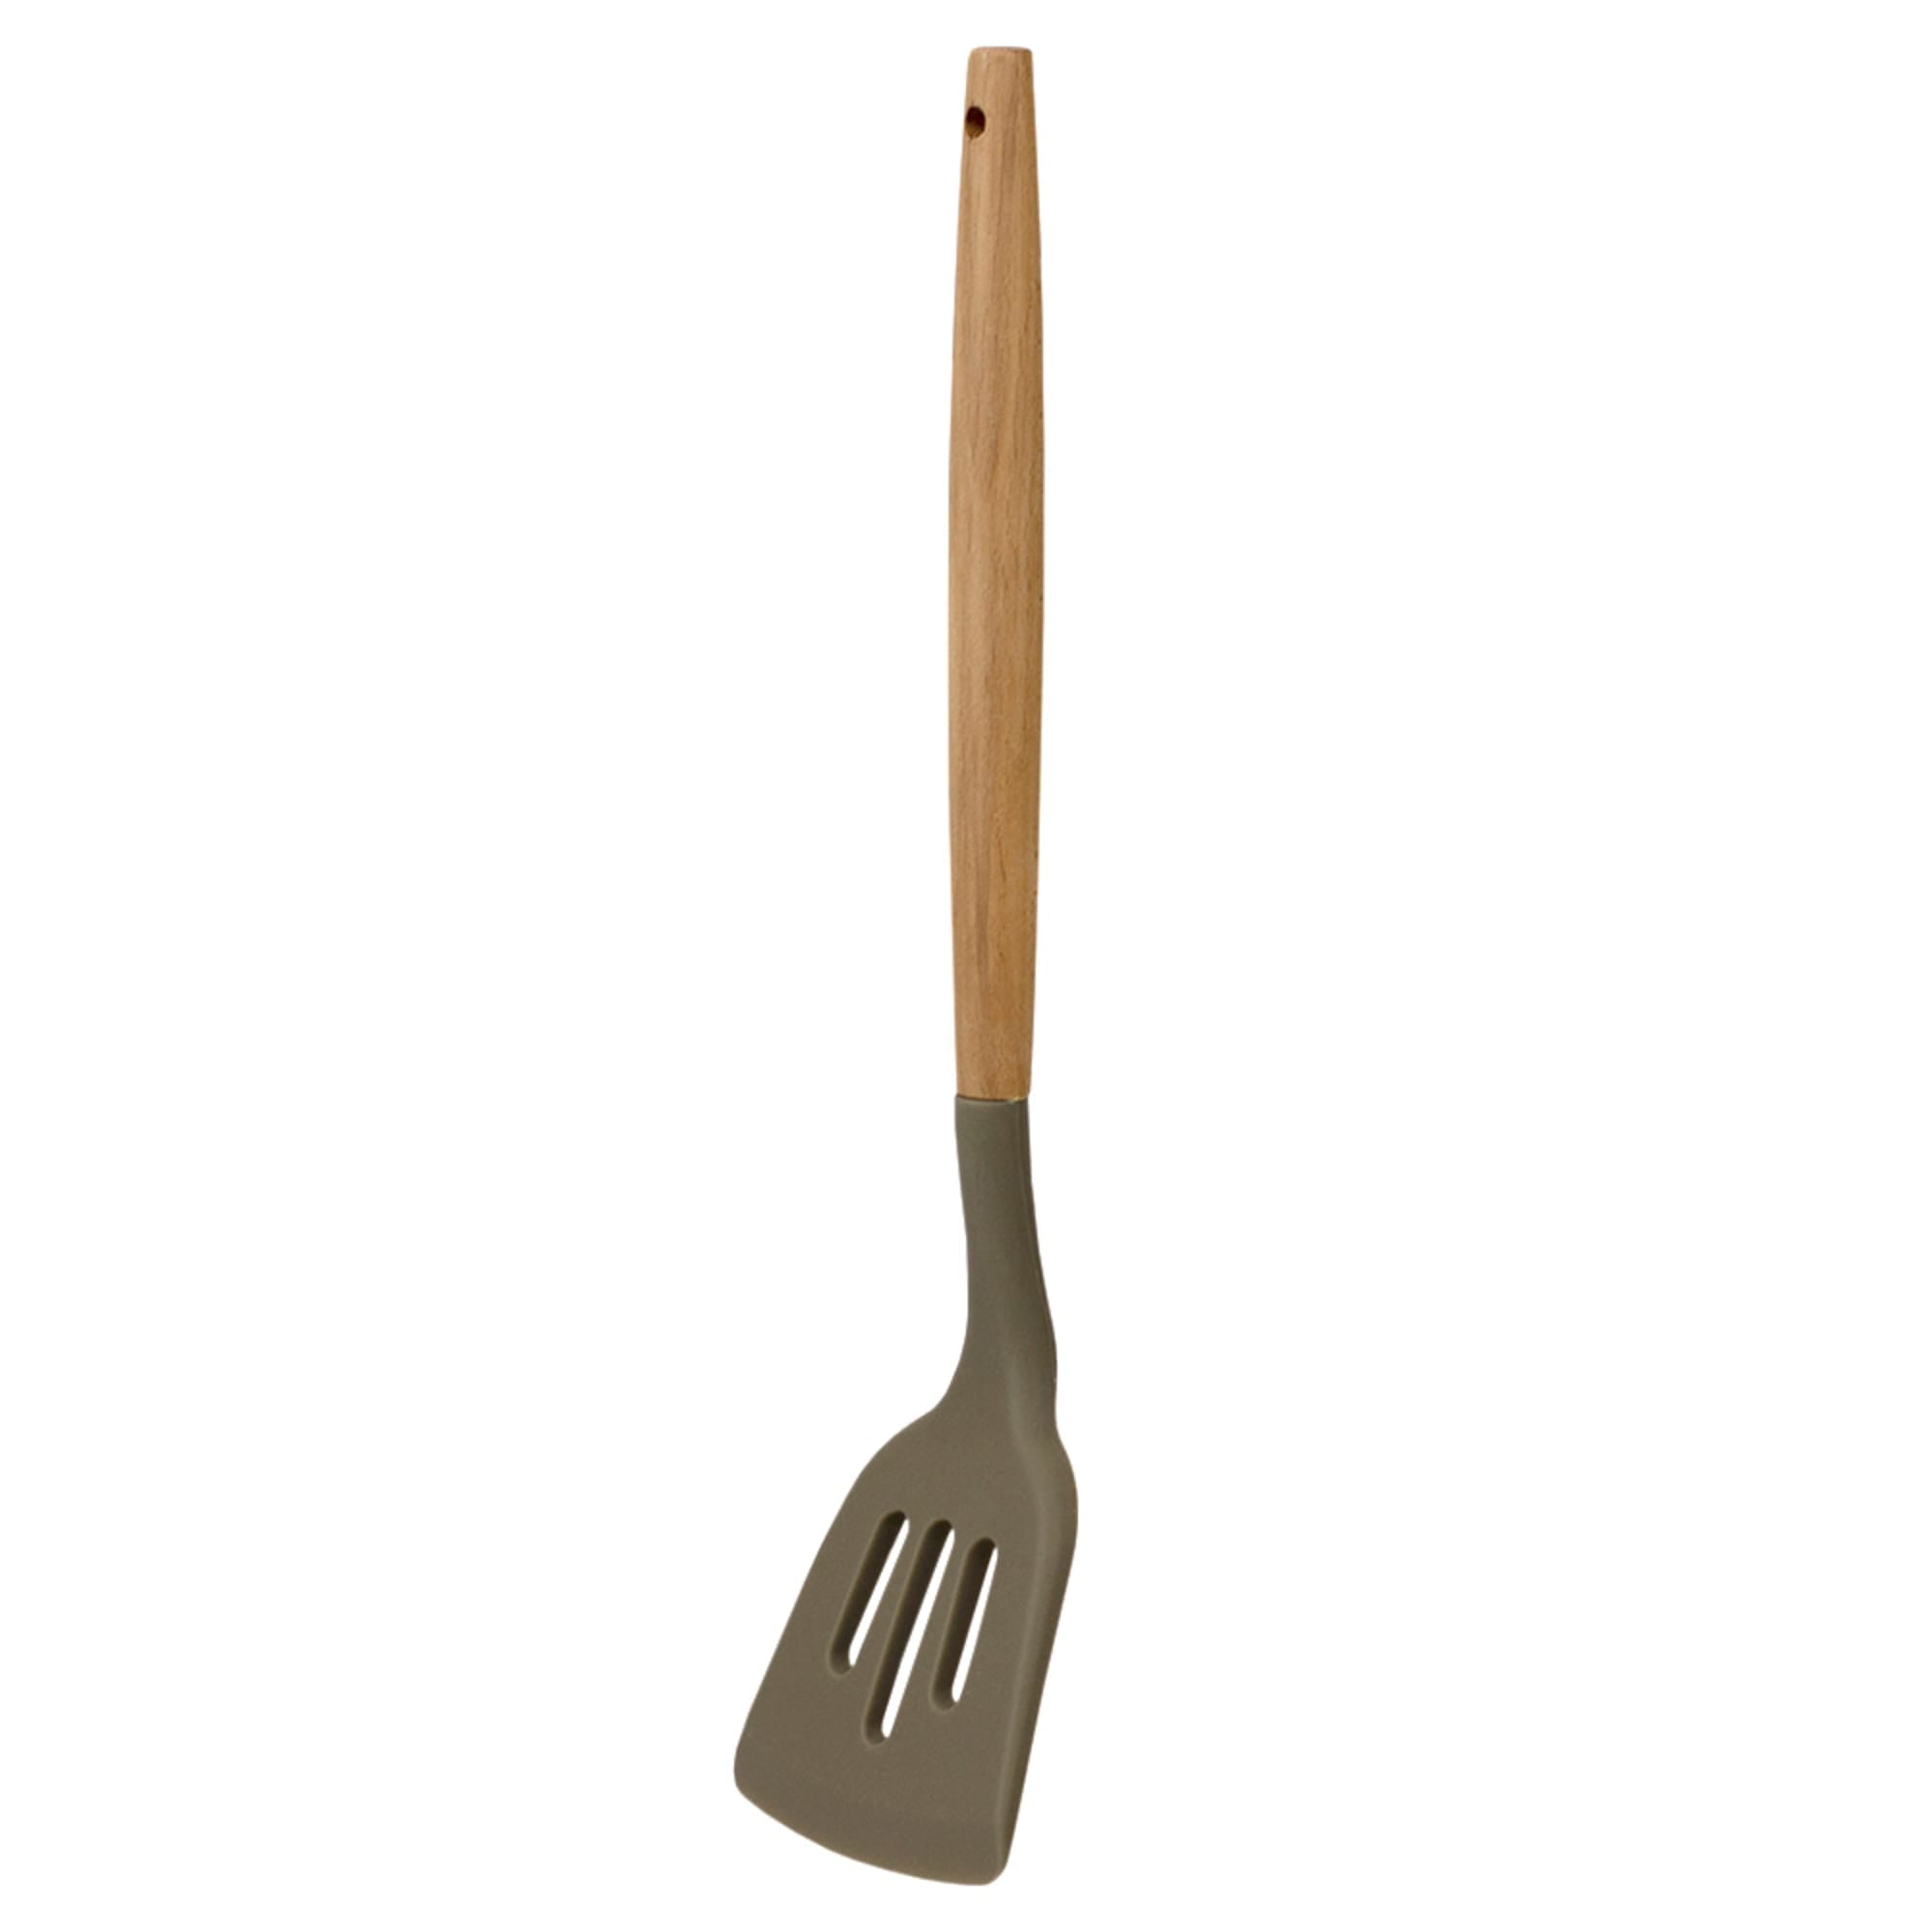 Home Basics Karina High-Heat Resistance Non-Stick Safe  Silicone Slotted Spatula with  Easy Grip Beech Wood Handle, Grey $2.50 EACH, CASE PACK OF 24